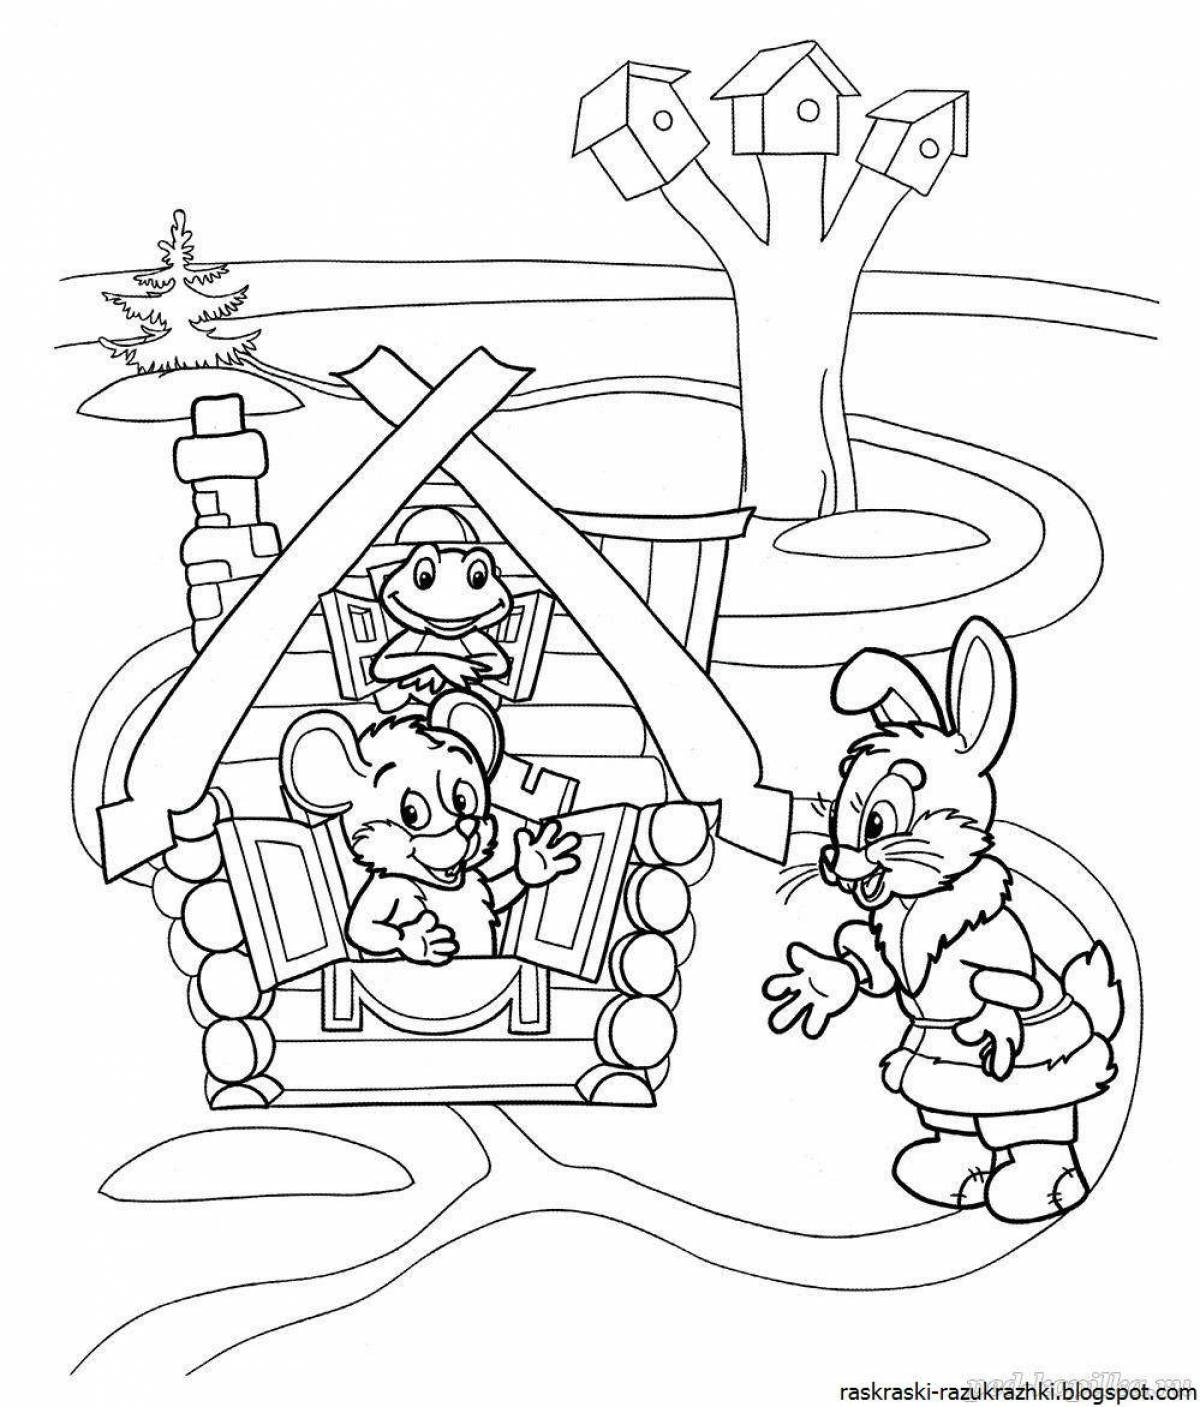 Charming house coloring book for kids